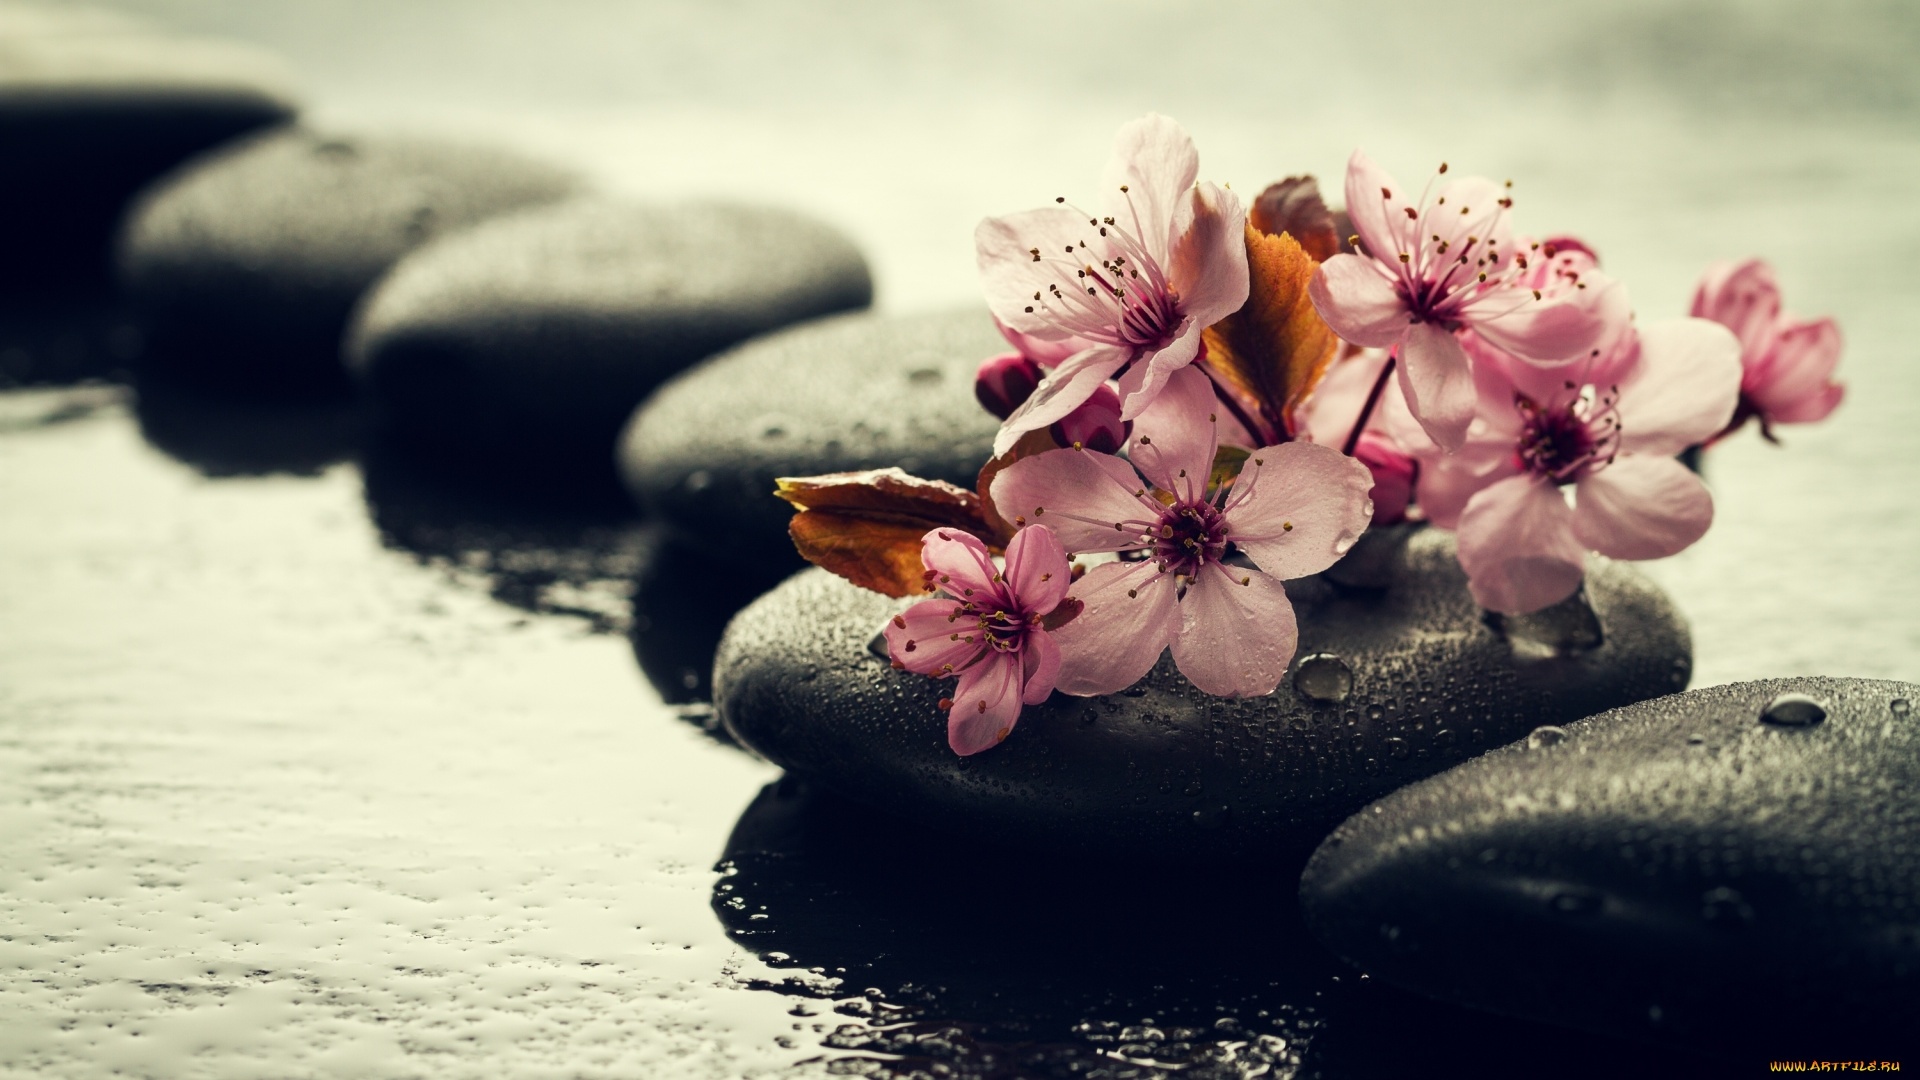 Flower And Stones Wallpaper